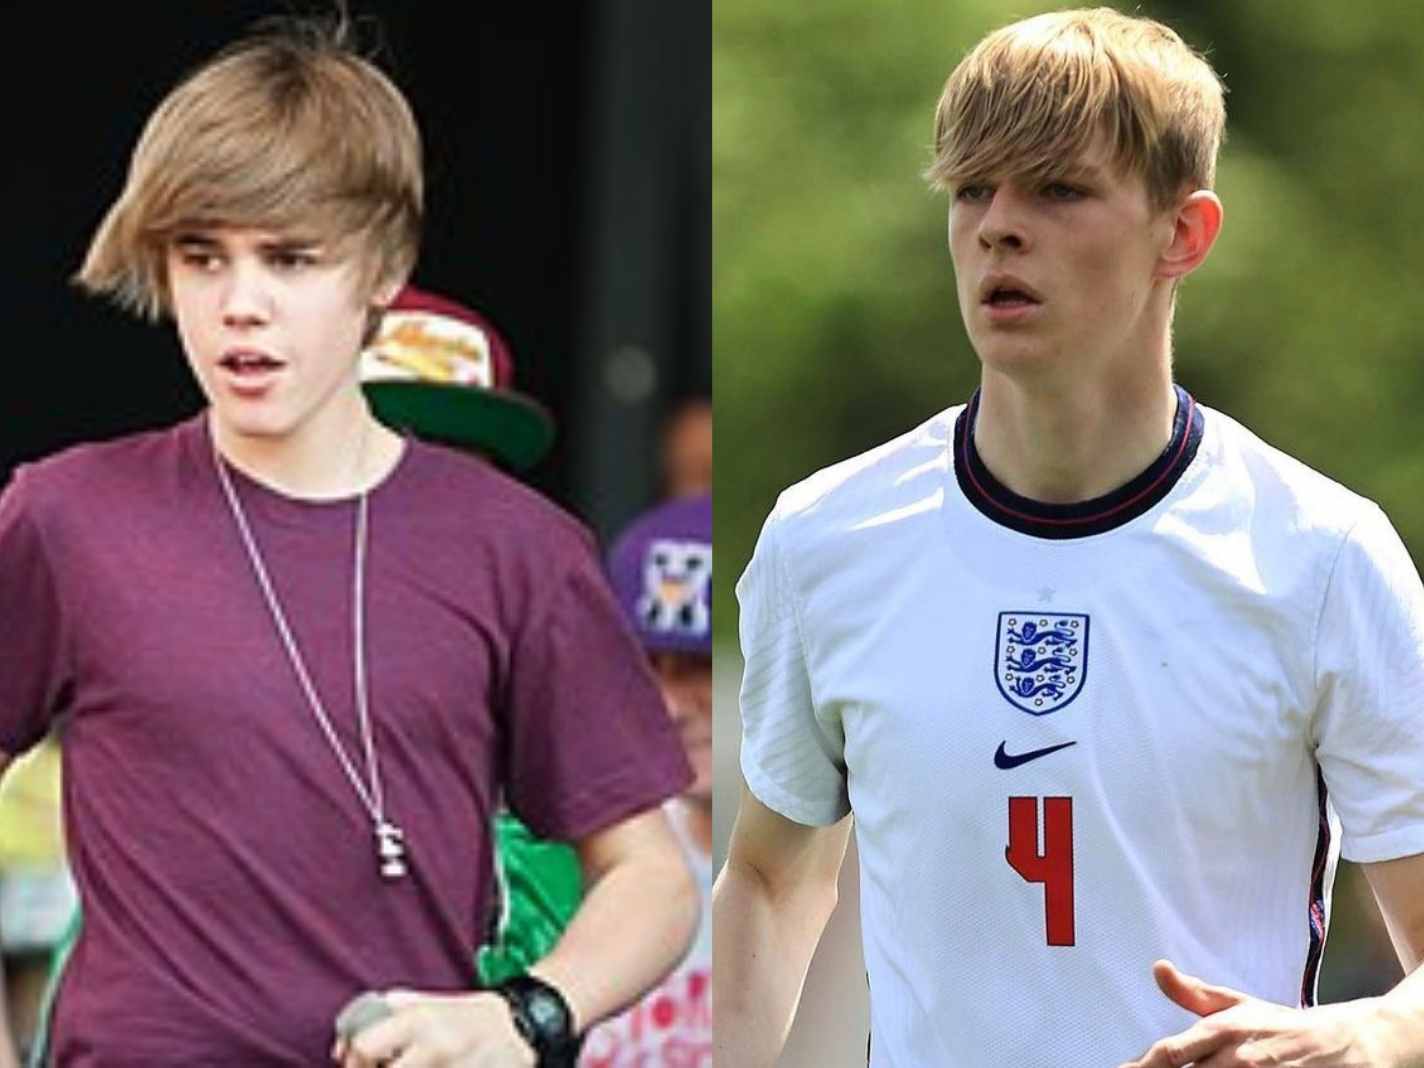 Toby Collyer: The latest Man United signing to give off early Justin Bieber vibes